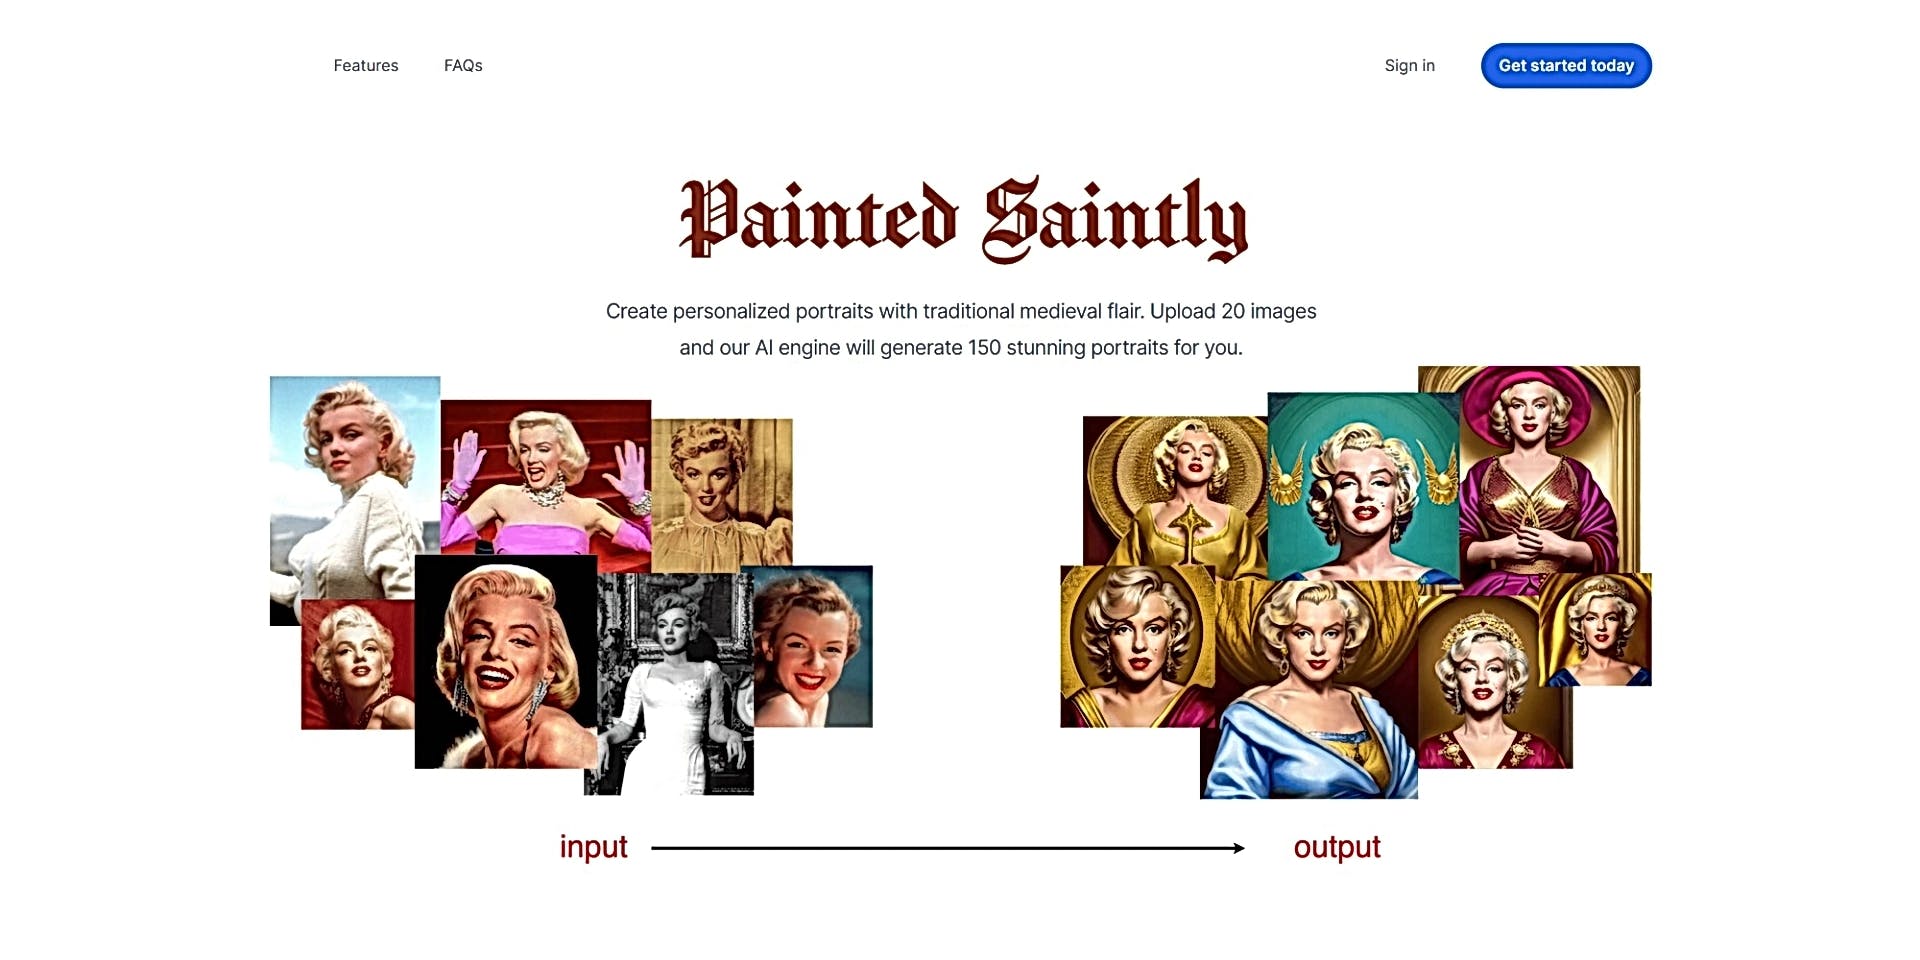 Painted Saintly featured